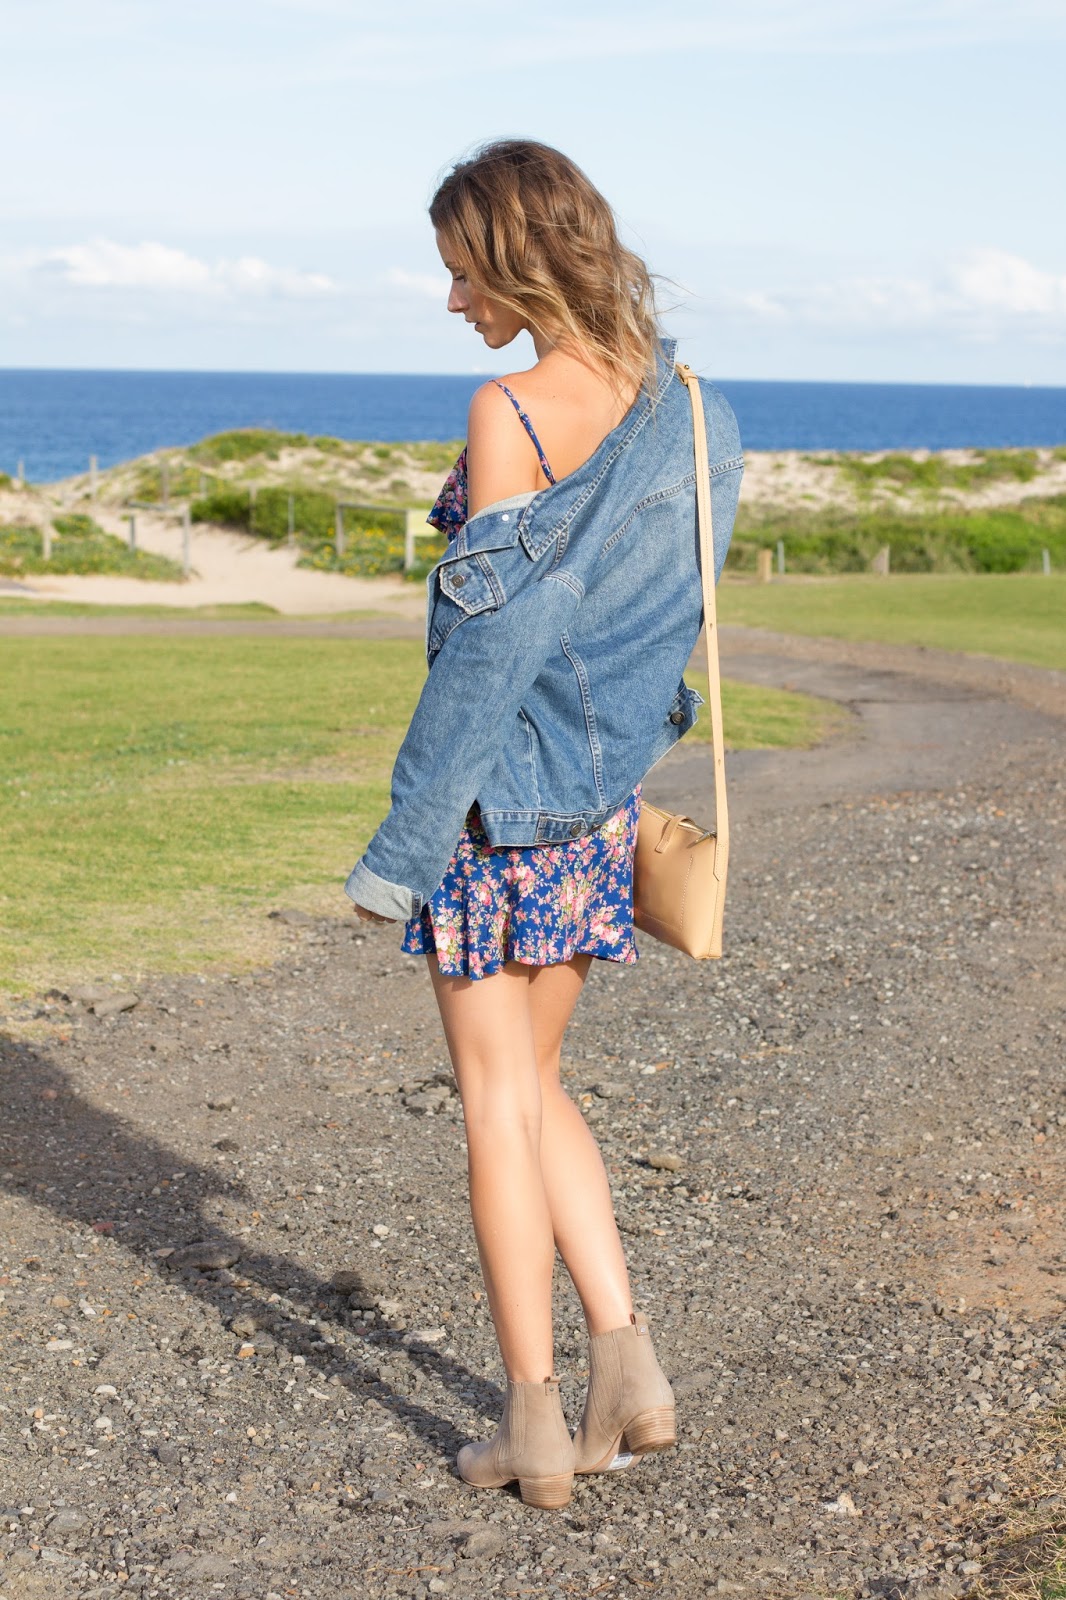 fashion blogger and designer, Alison Hutchinson, is wearing a KAYVALYA blue floral wrap dress, Topshop denim jacket, and Witchery nude suede ankle boots